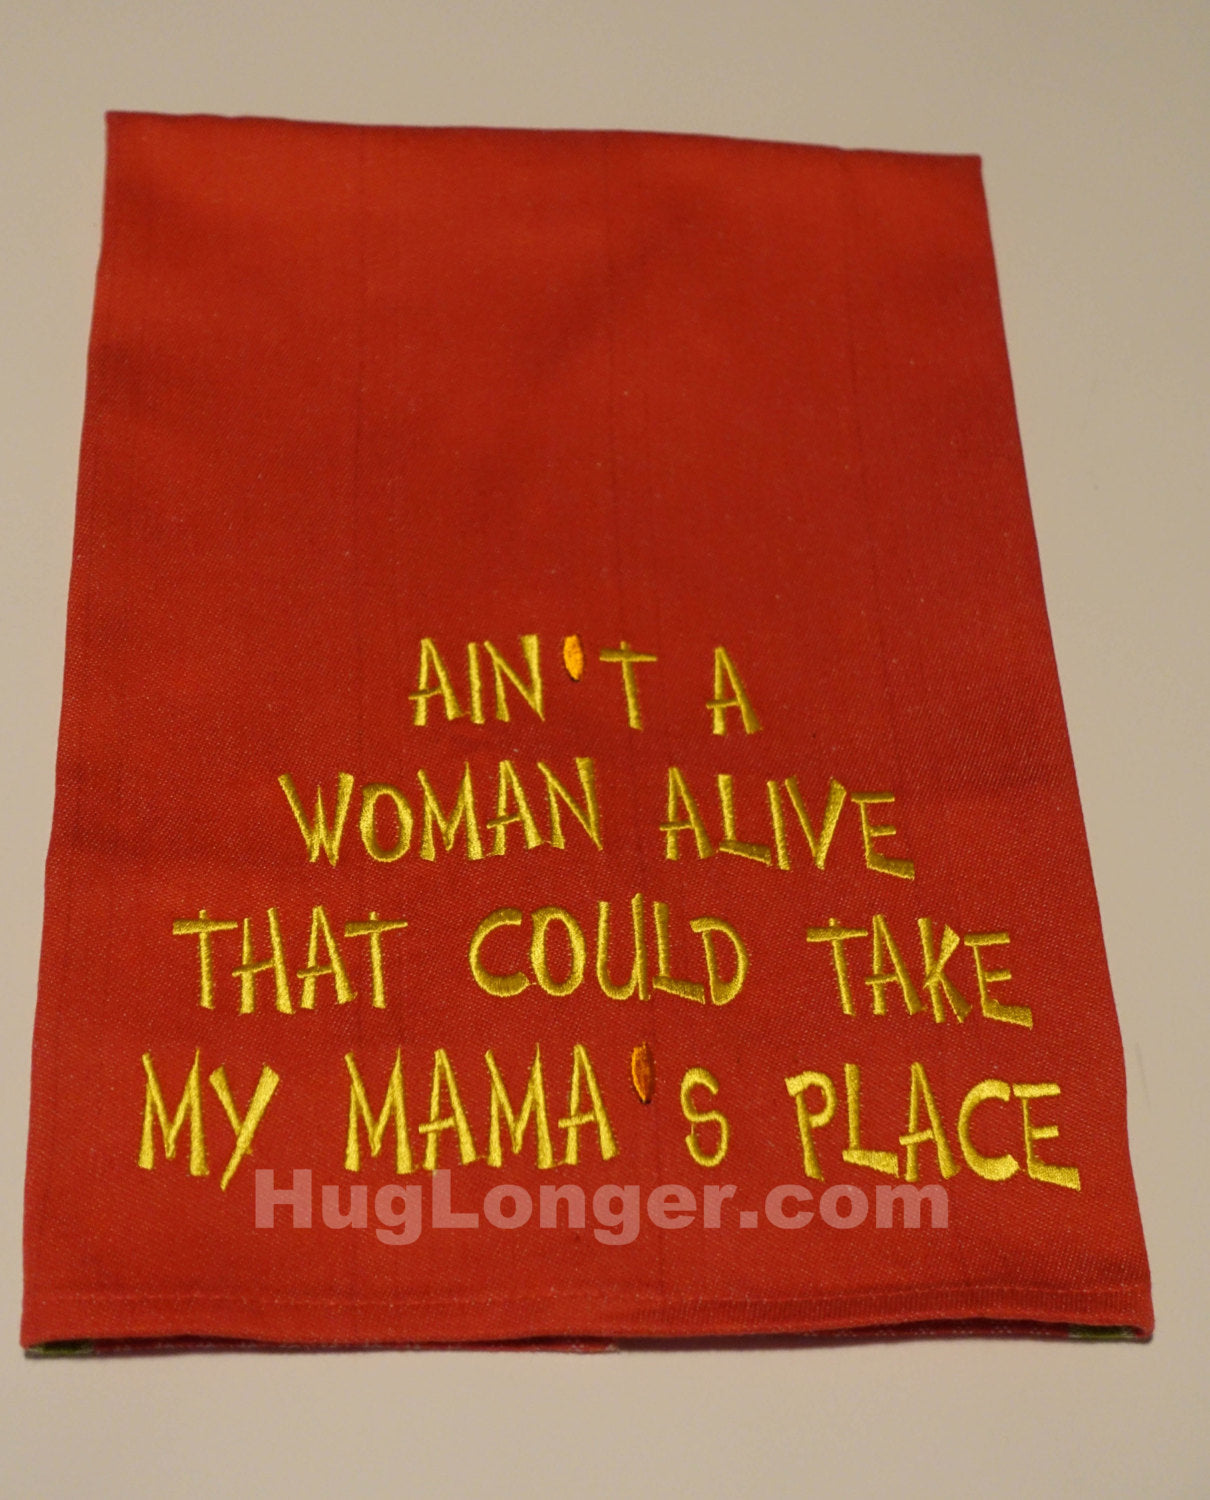 Download Ain't A Woman Alive That Could Take My Mama's Place embroidery design - Hug Longer Digital Design